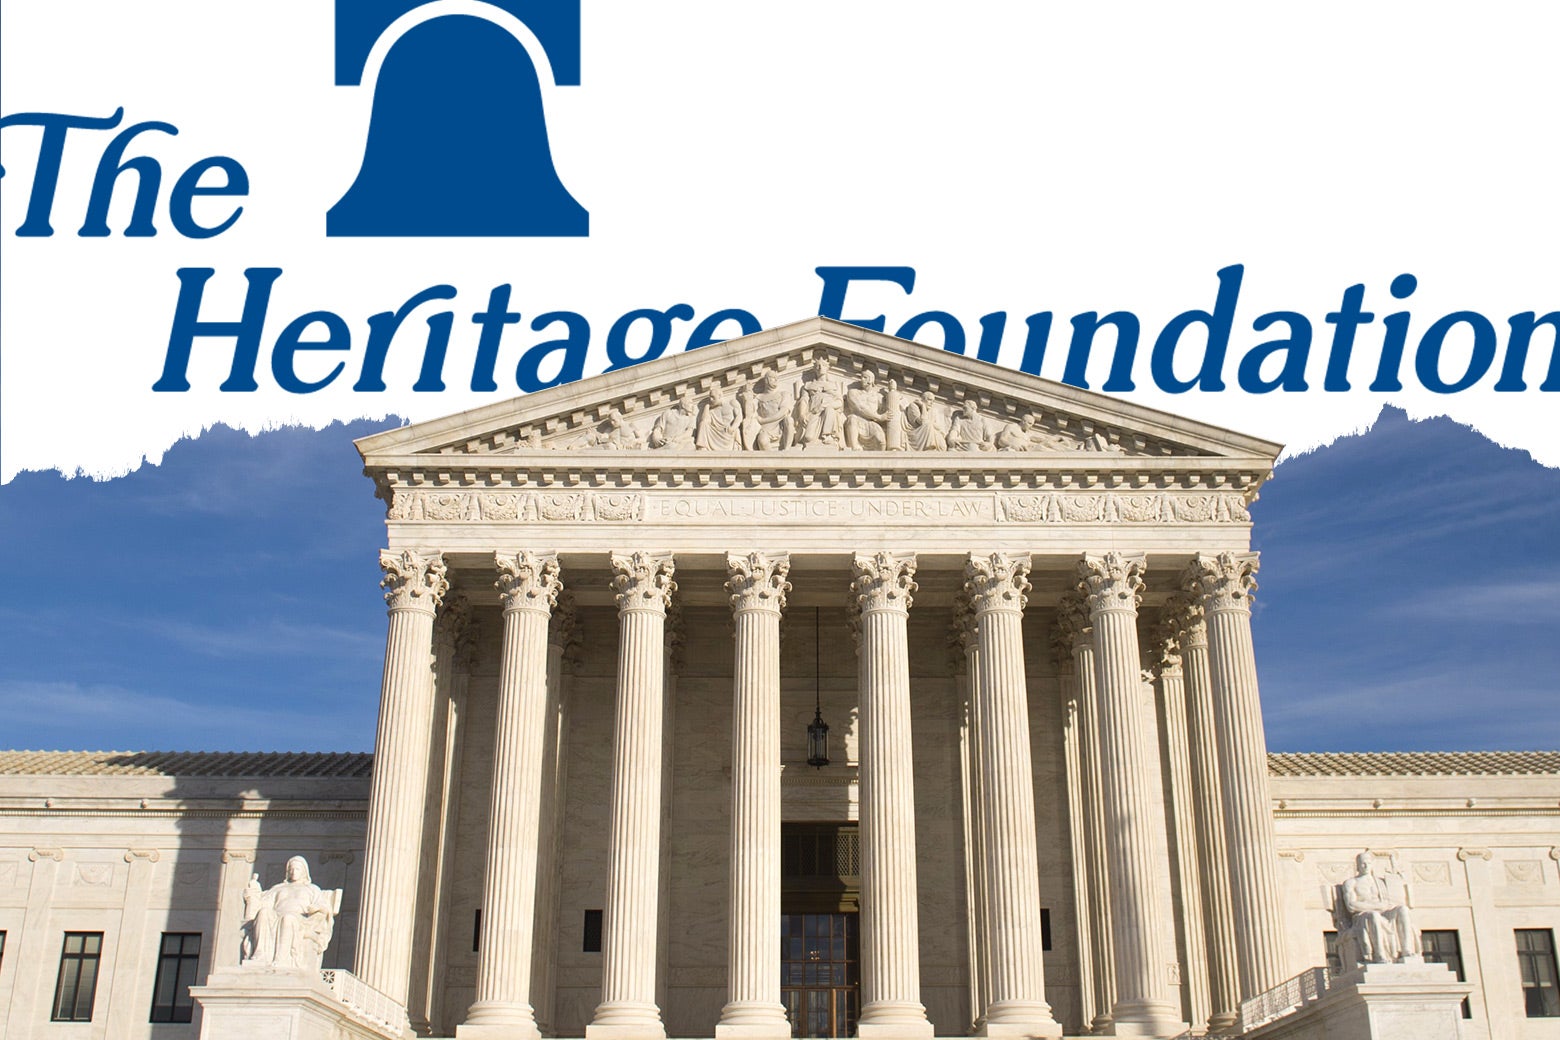 Picture of the Supreme Court with the Heritage Foundation logo superimposed.